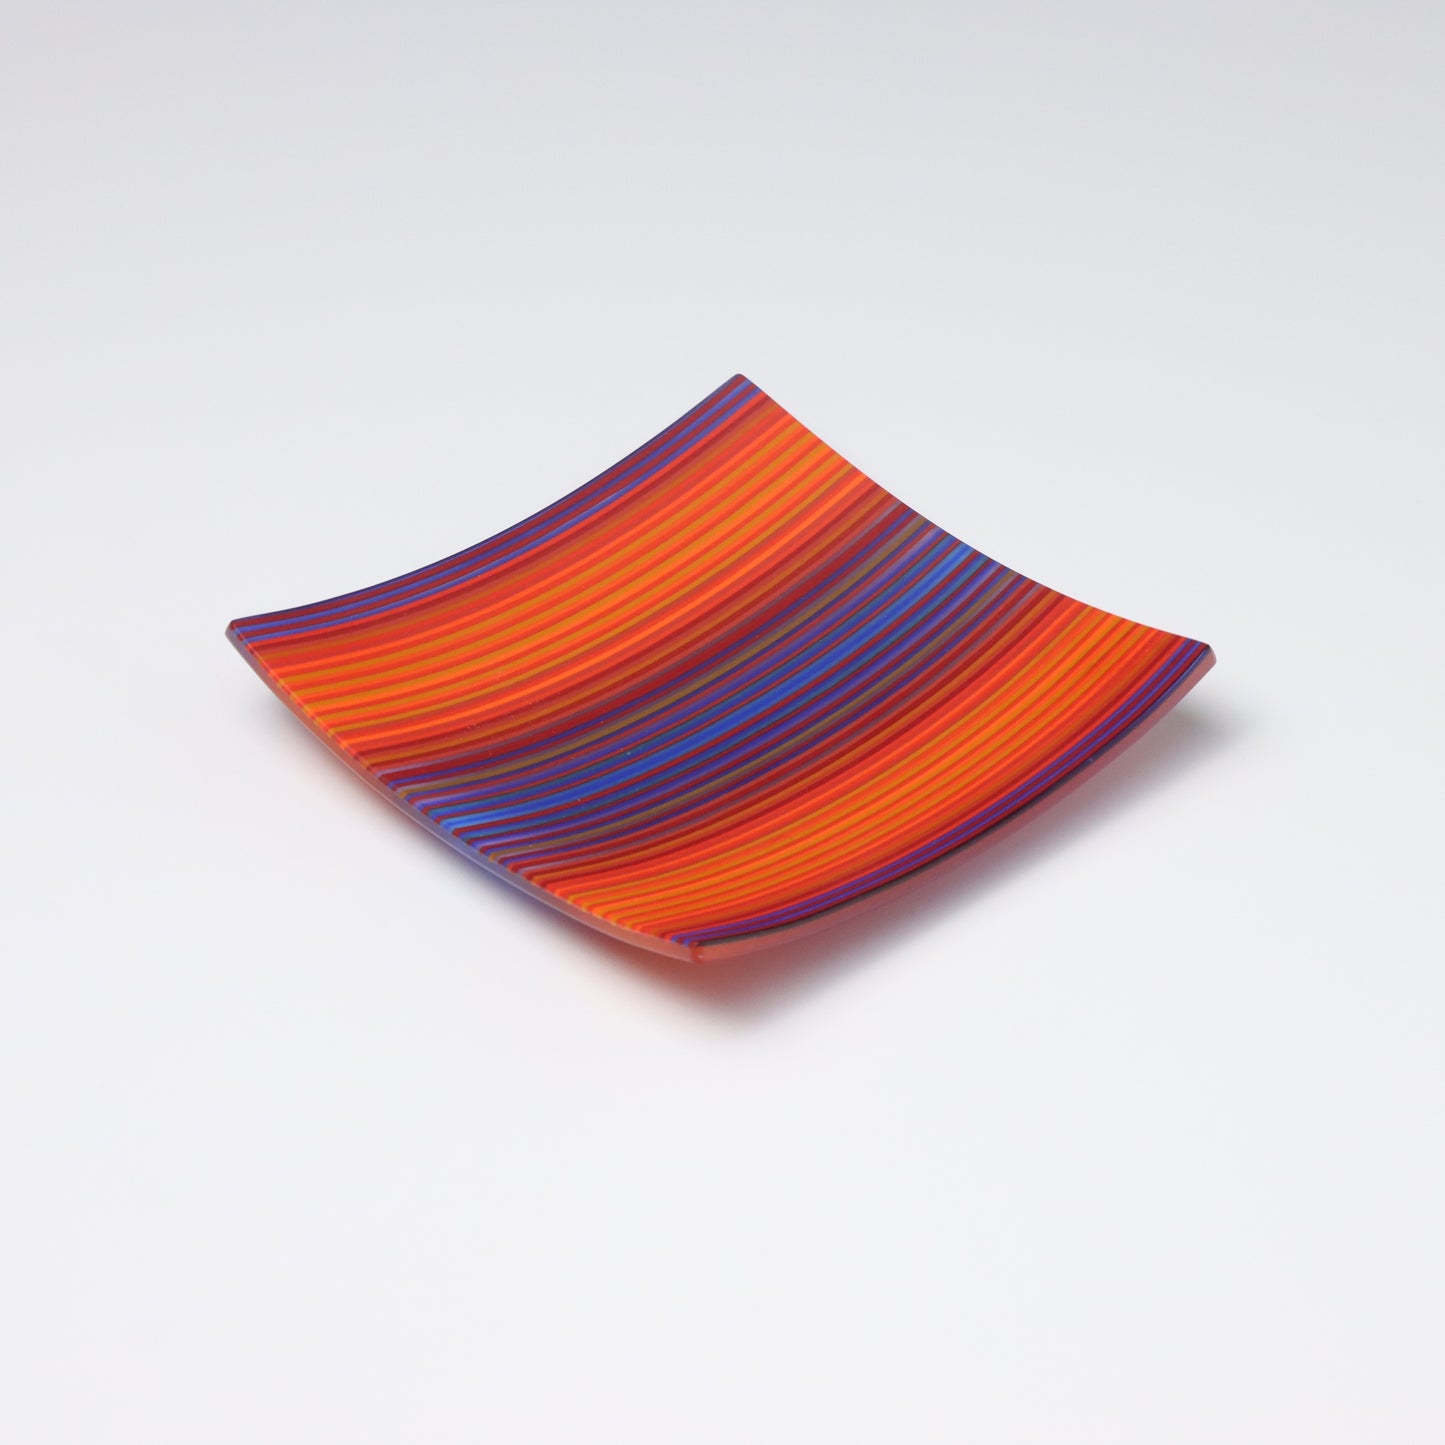 An exquisite ColourWave fused glass plate, square in shape with corners that subtly curve upwards to form a shallow dish. The plate is decorated with a lively pattern of red, orange, and blue stripes, in a wave like pattern. Set against a  white background, the plate’s vibrant colours are beautifully accentuated.